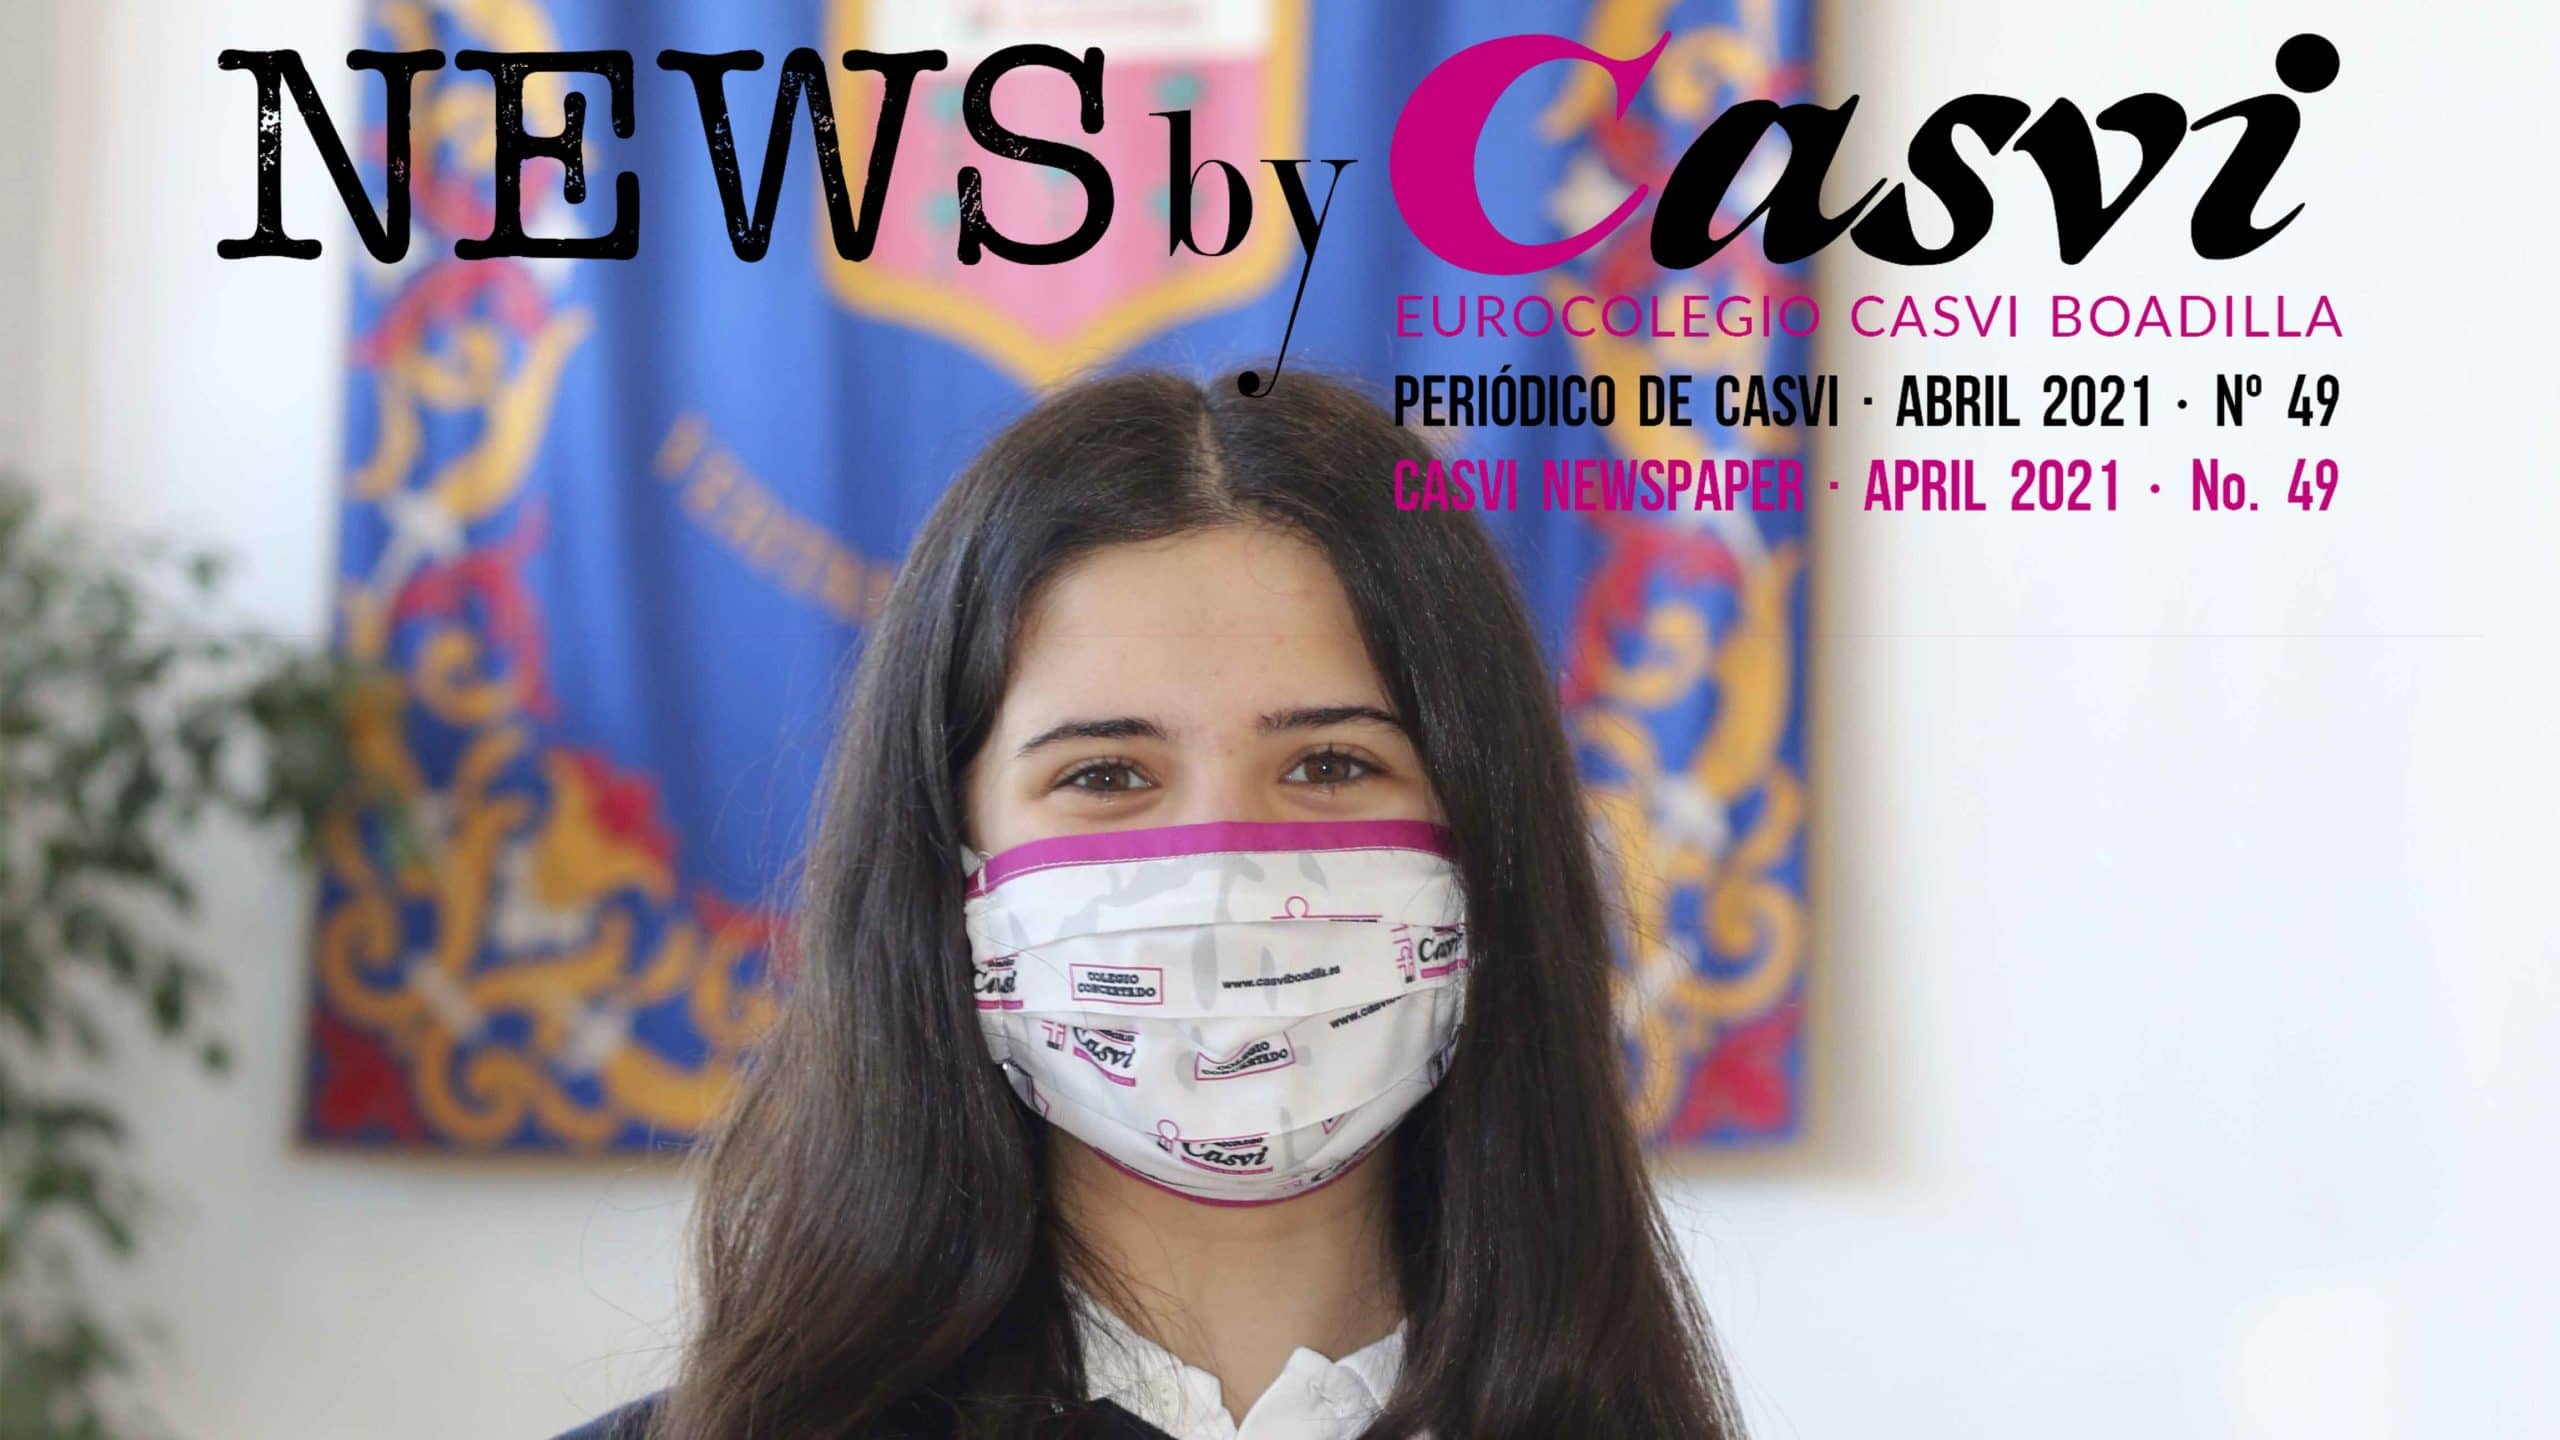 Front_News_By_Casvi_Abril